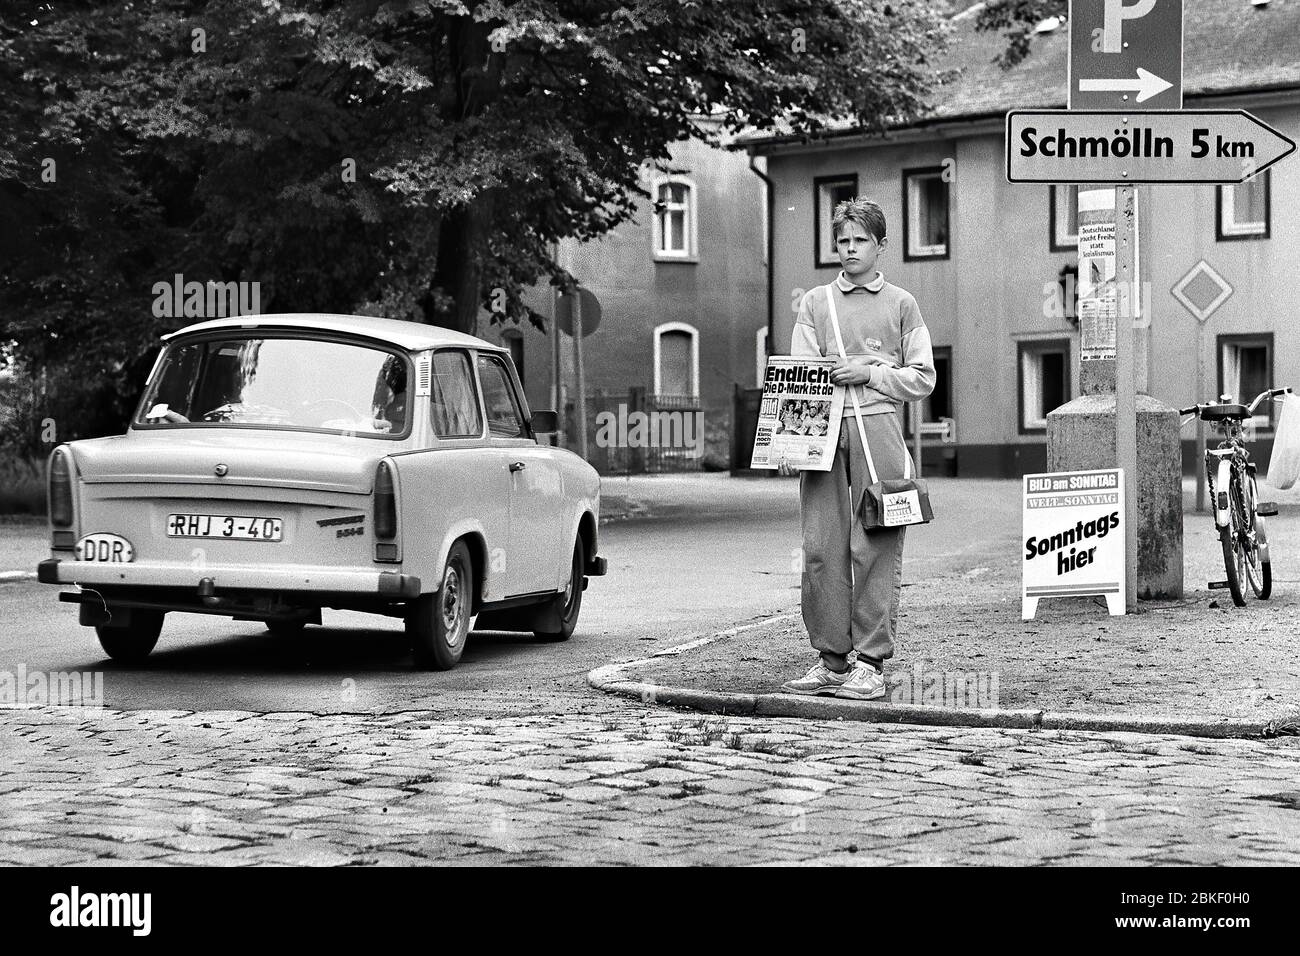 At last, the D-Mark is there, headline of the German newspaper Bild am Sonntag on the day of the monetary union of the FRG and GDR, a Trabant with Stock Photo